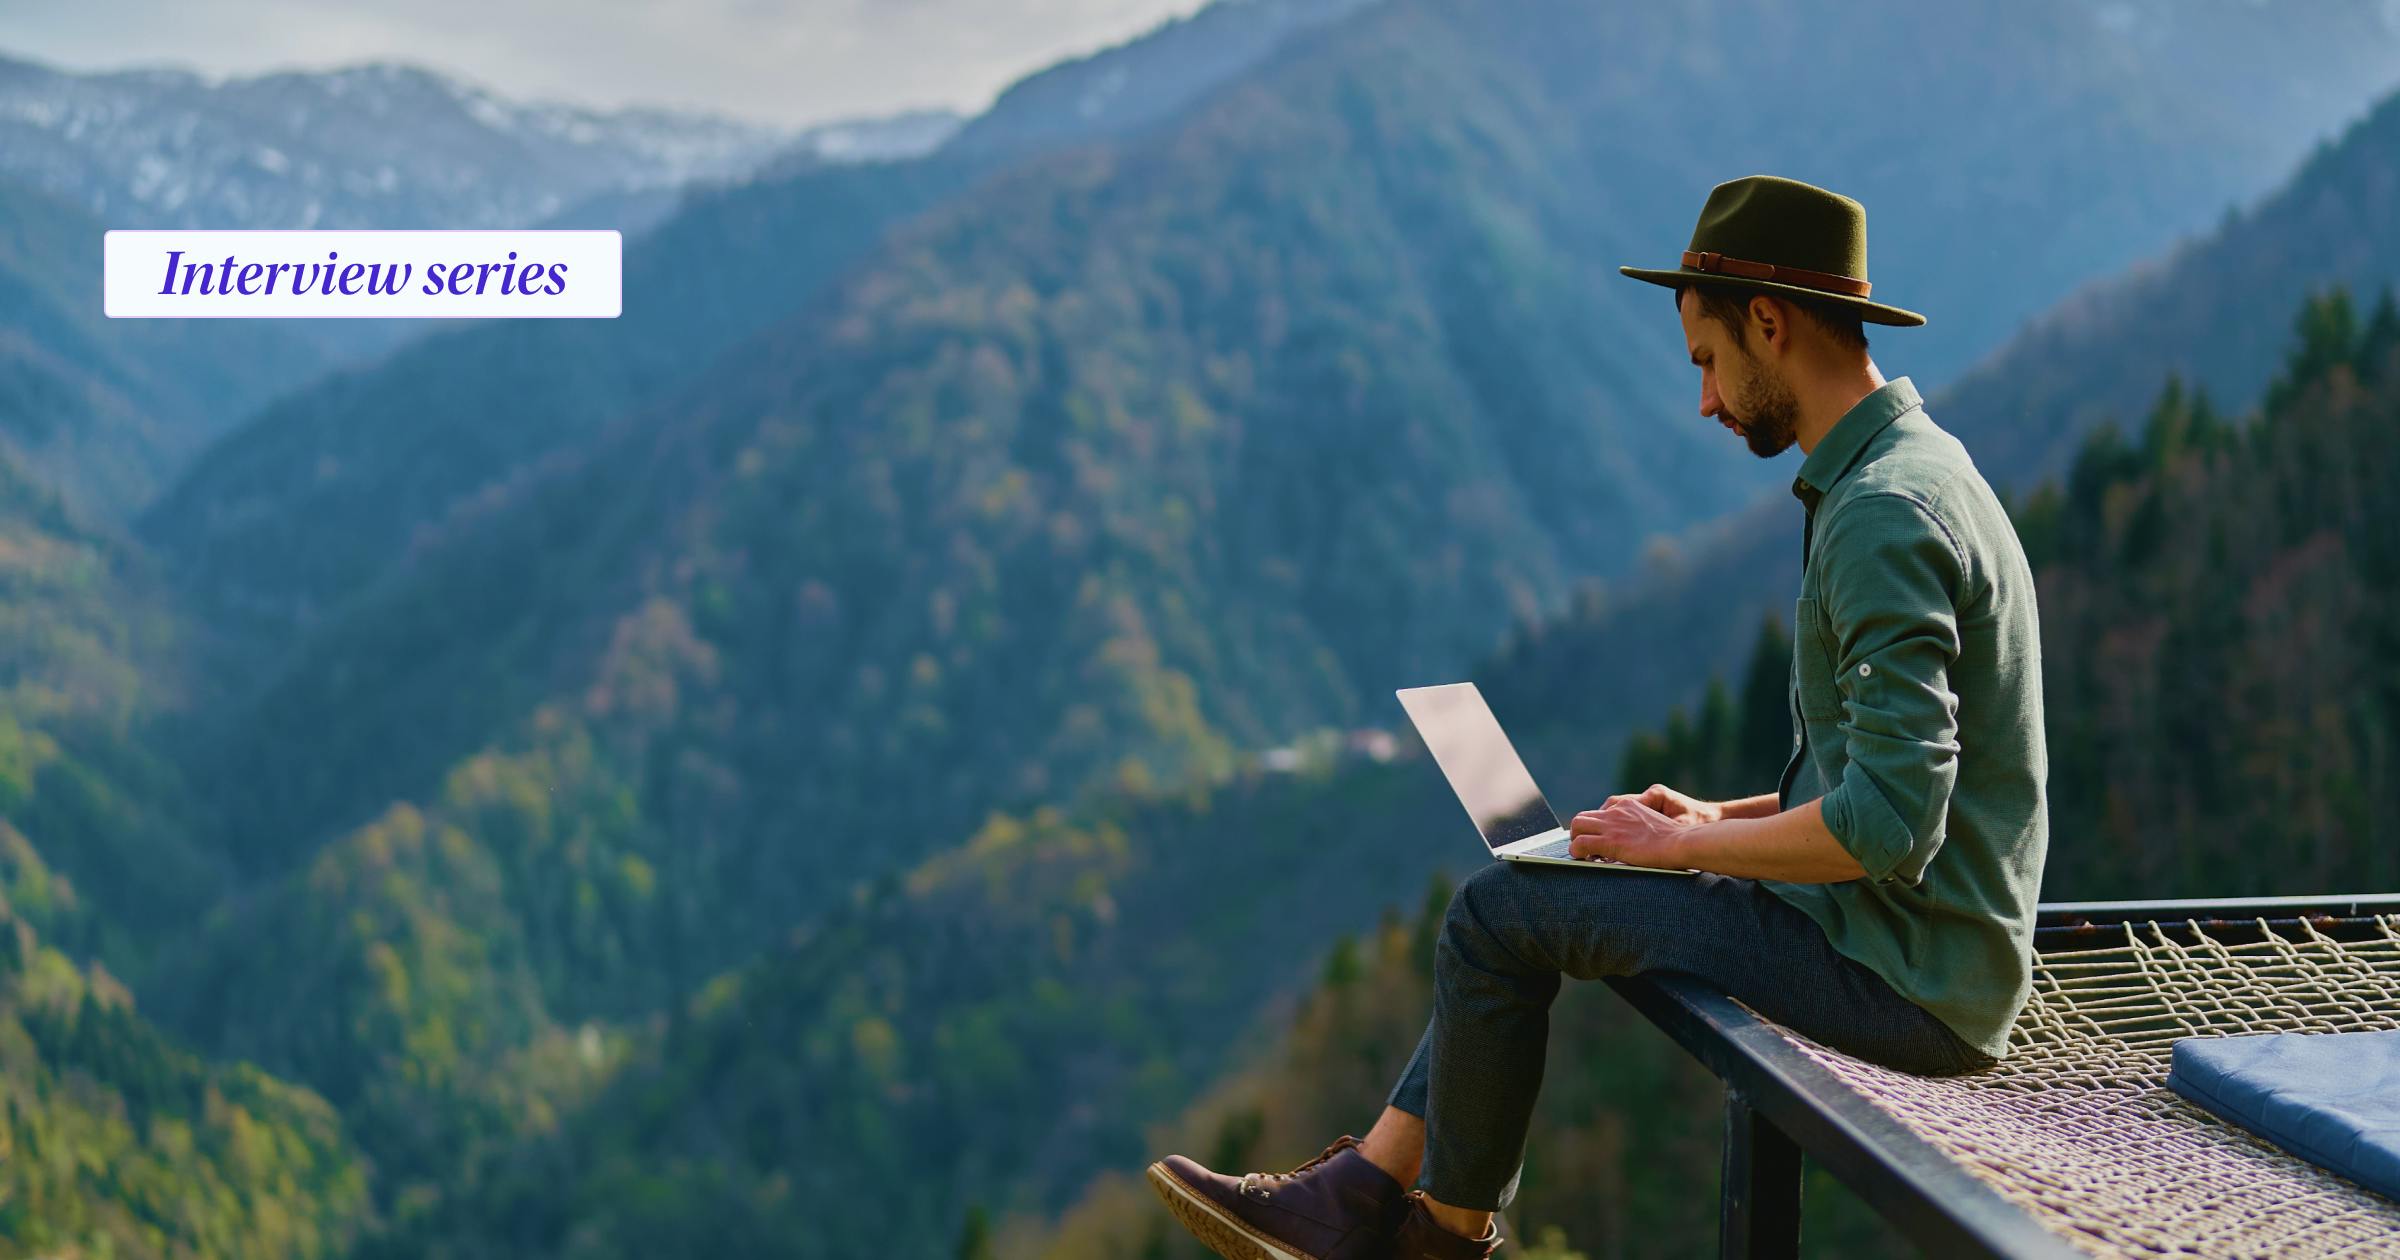 Man with hat sitting on a net with mountains in the background working on his laptop and the words interview series on the image